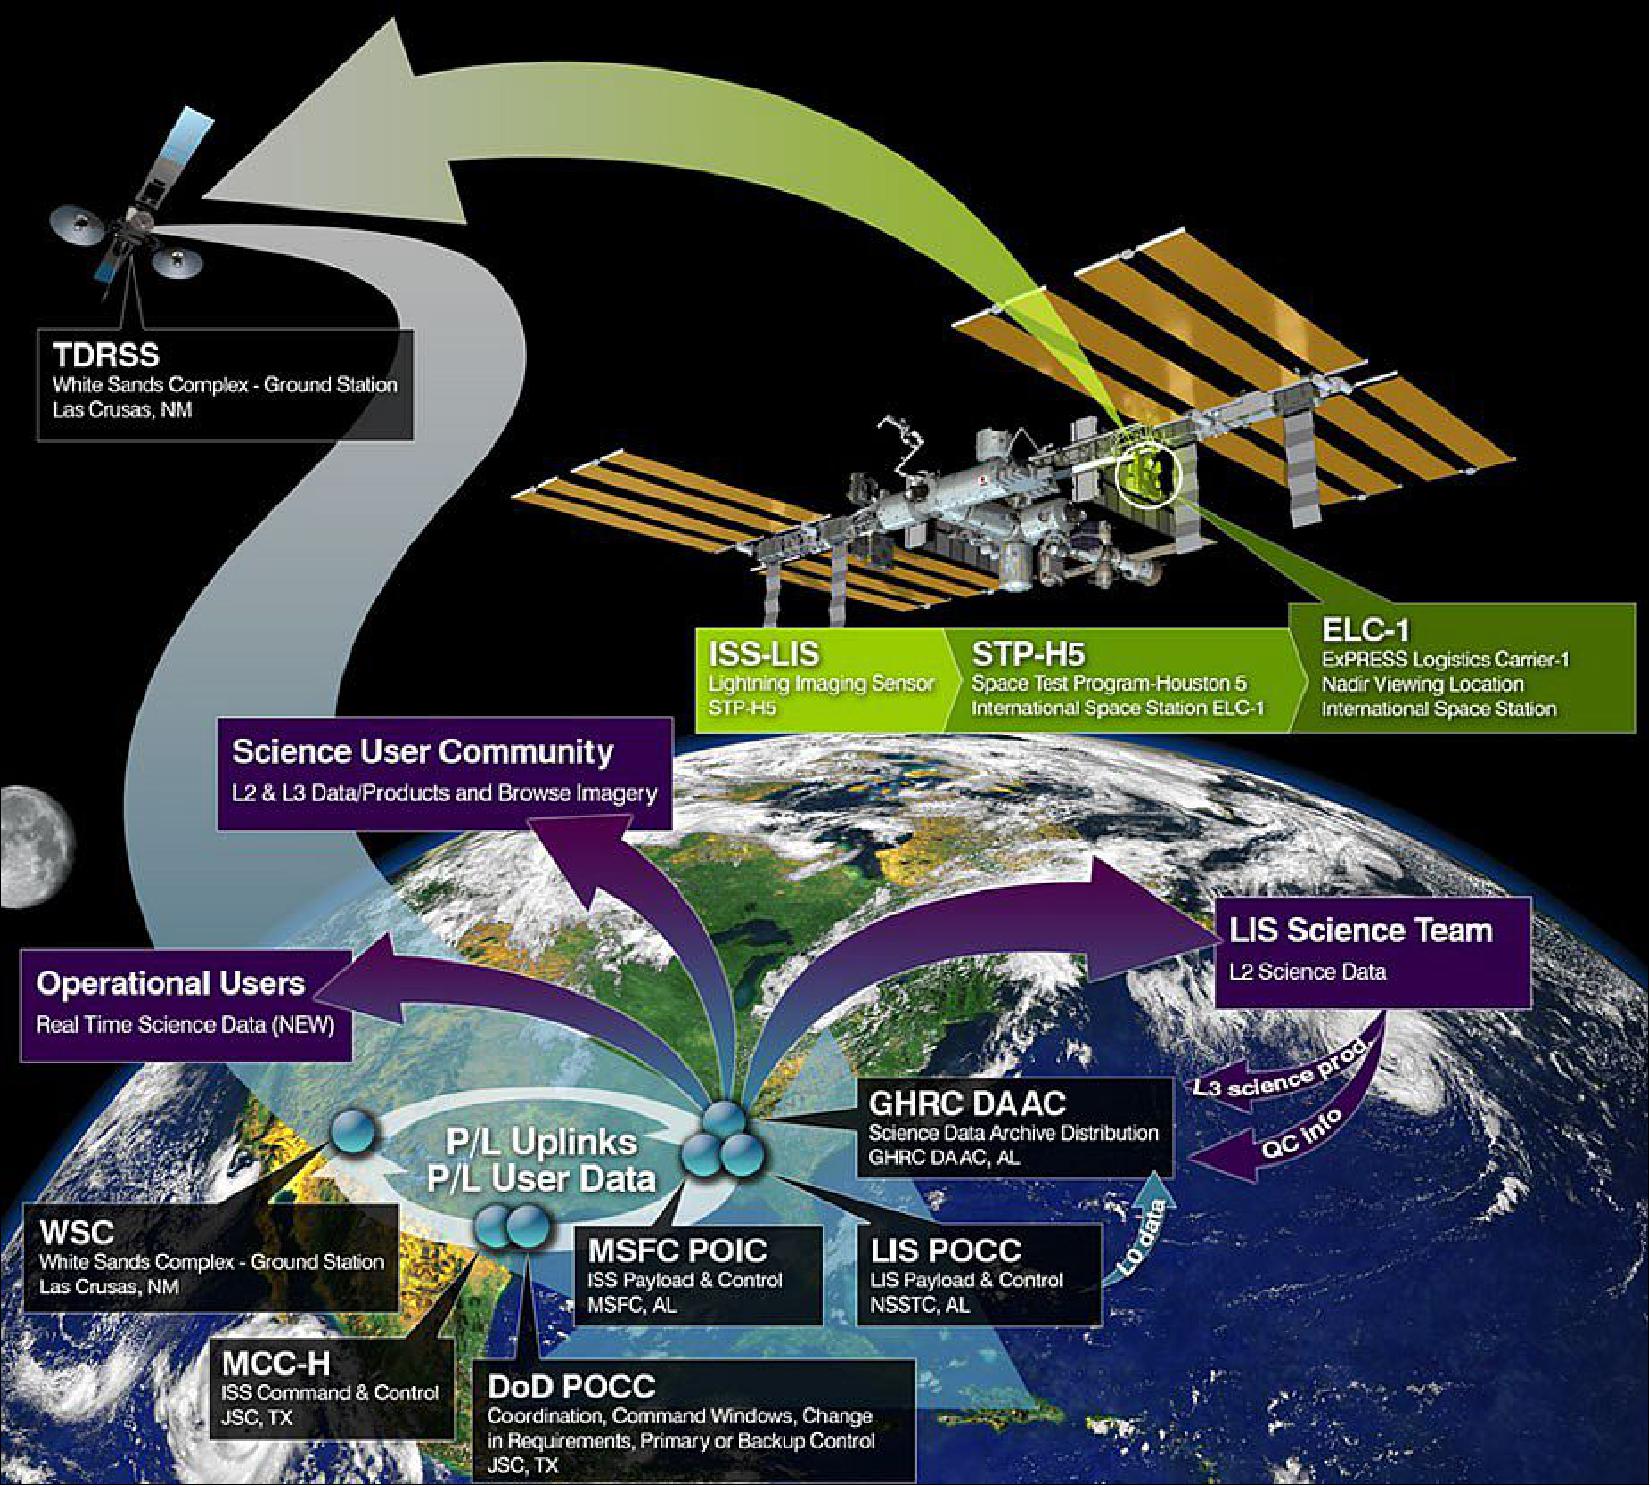 Figure 13: This graphic shows the data flow from the LIS instrument to the LIS POCC and GHRC DAAC, where the data will be processed, archived, and distributed to the science community and operational users (image credit: NASA and UAH)